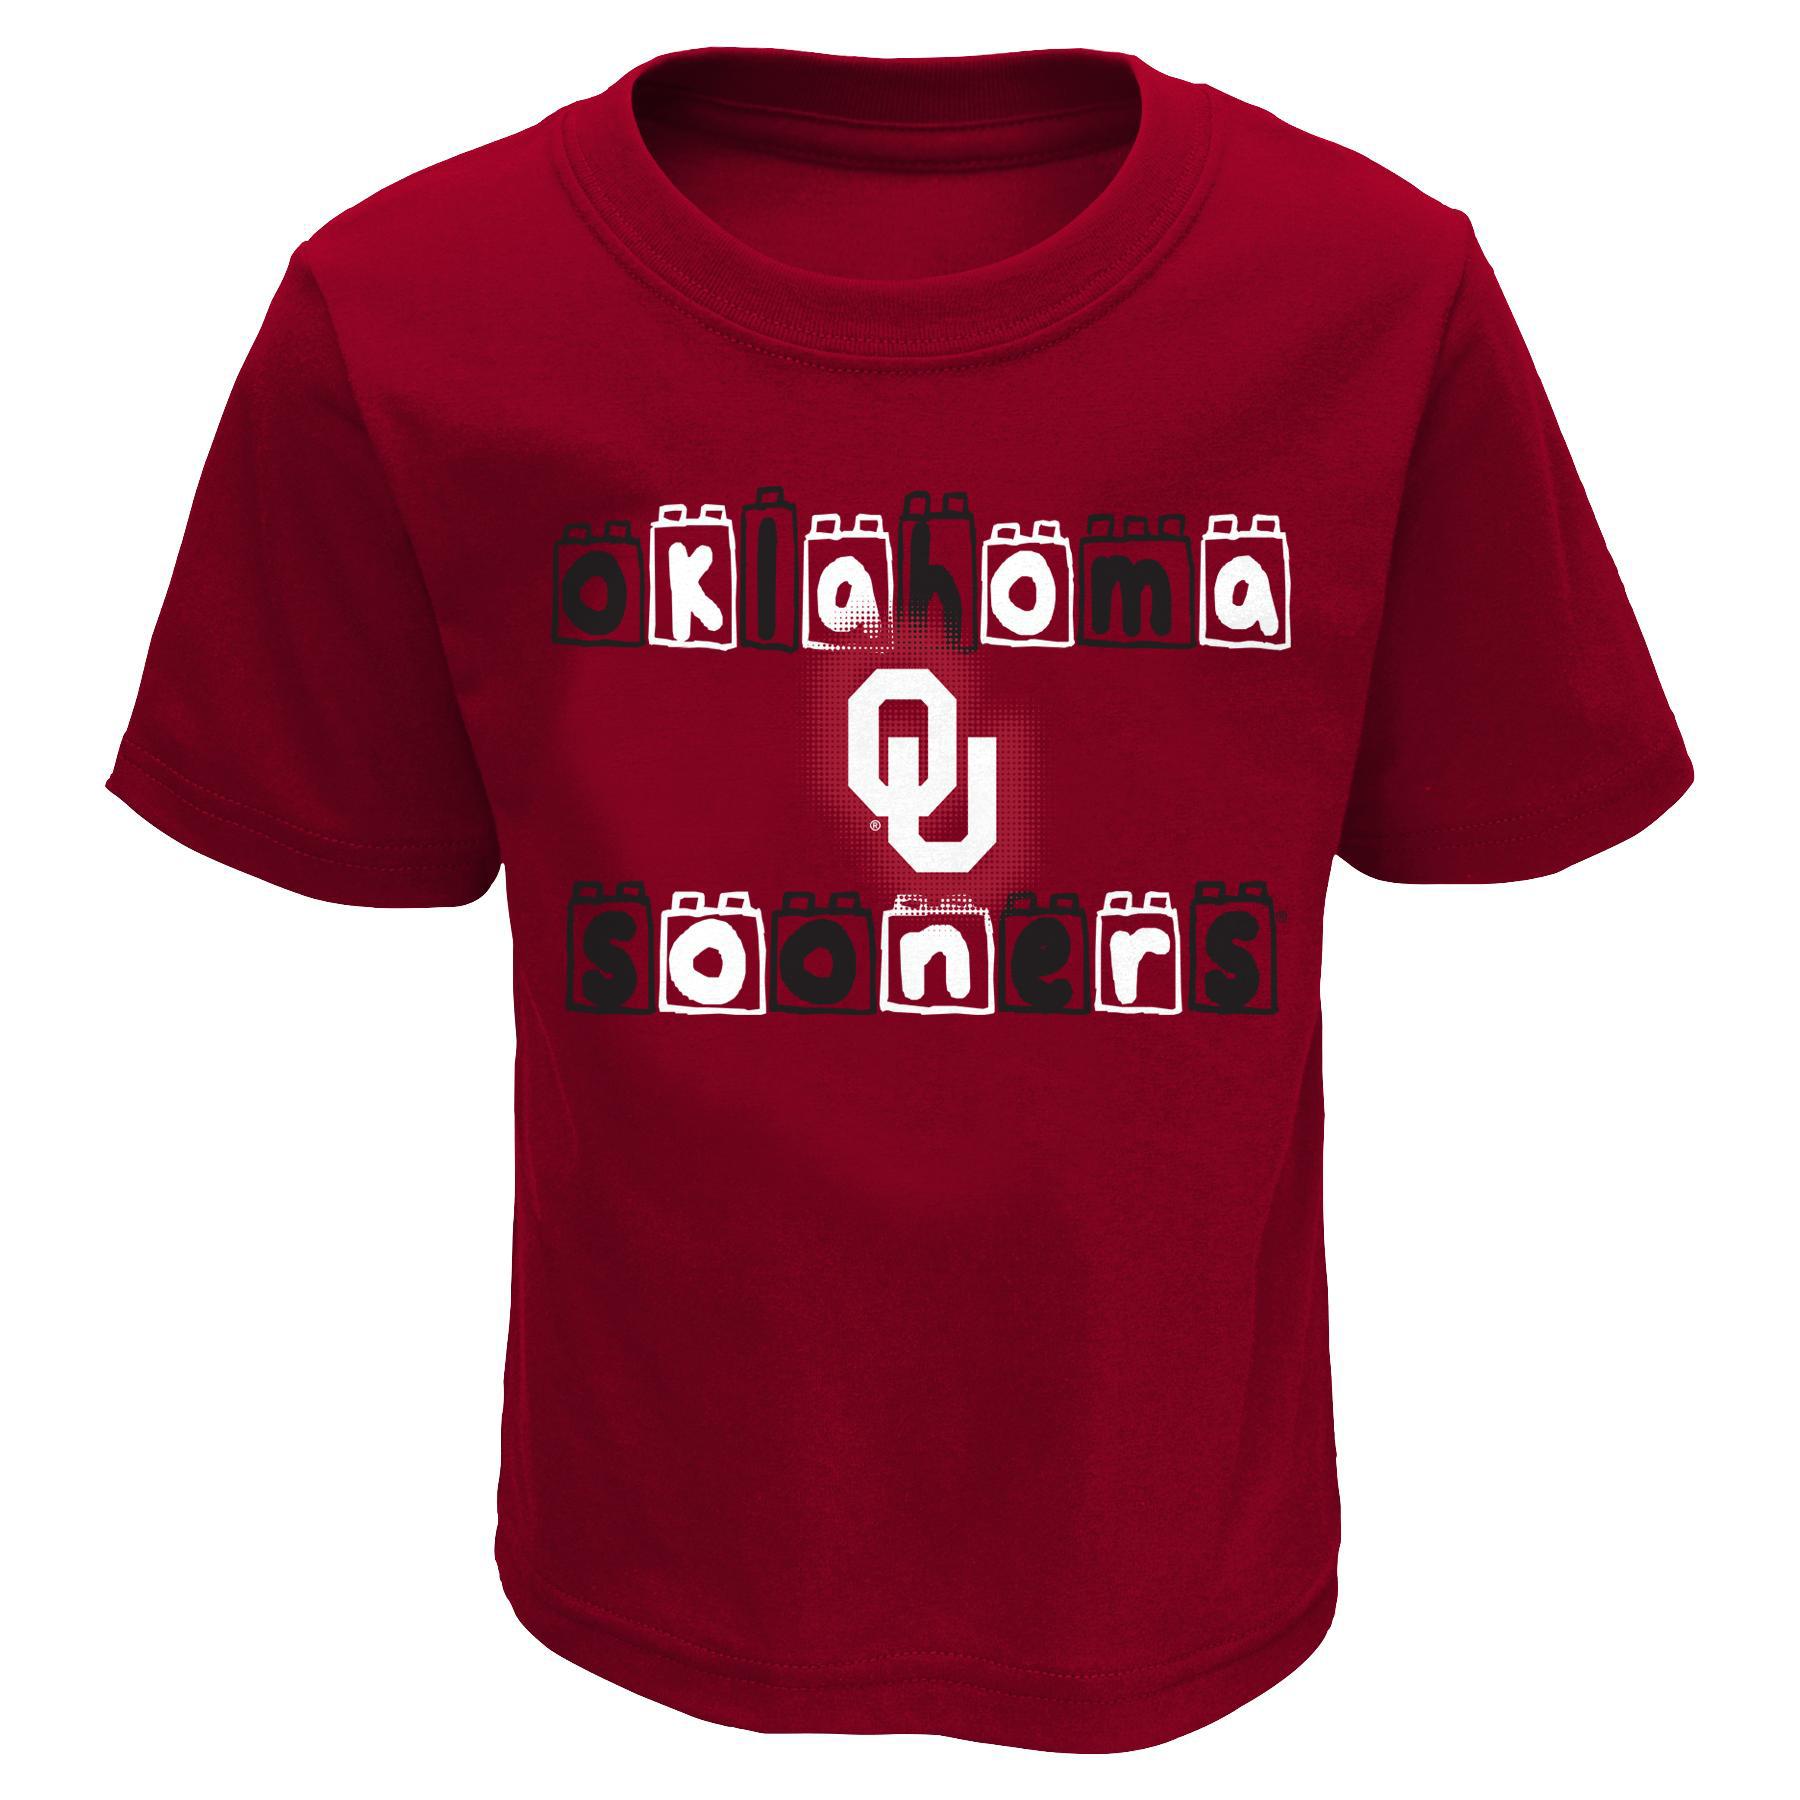 NCAA Toddler's Graphic T-Shirt - Oklahoma Sooners